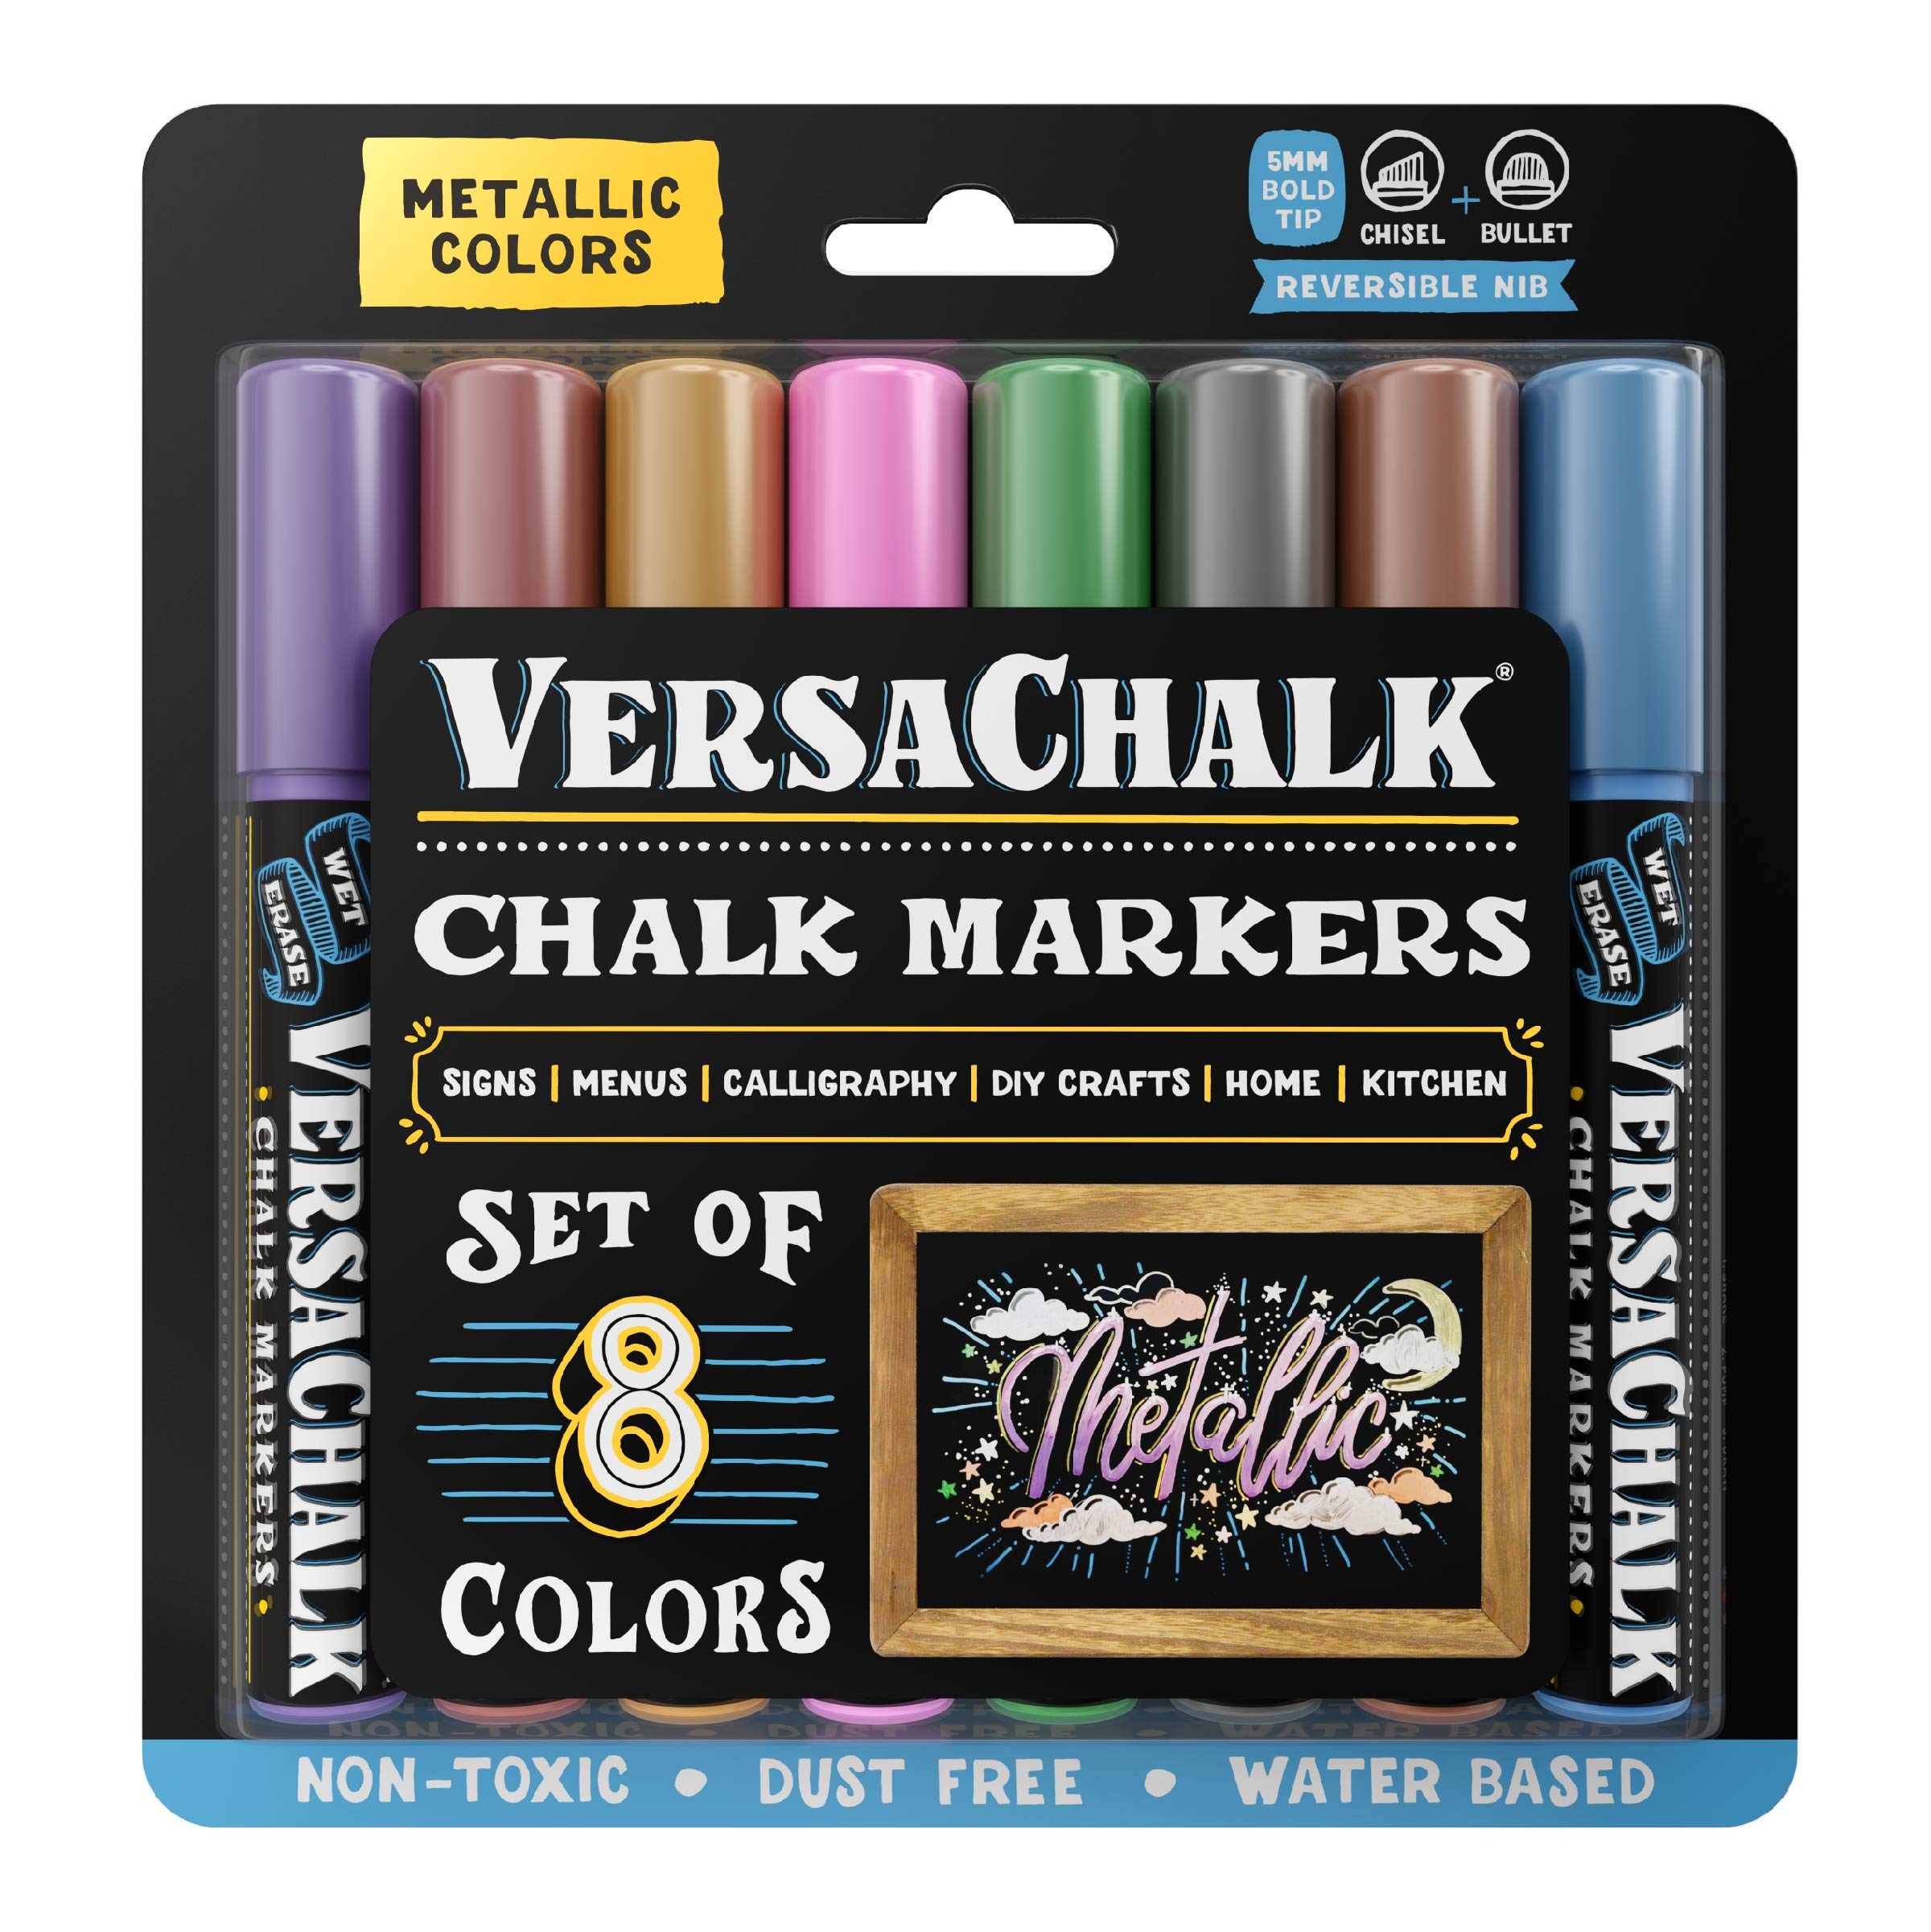 Book Cover VersaChalk Metallic Liquid Chalk Markers for Blackboards (8 Pack, 5mm, Bold Tip) - Erasable Washable Chalk Pens for Chalkboard Signs, Windows, Glass, Events, Schools, Office Supplies, and Business Bold 5mm Metallic